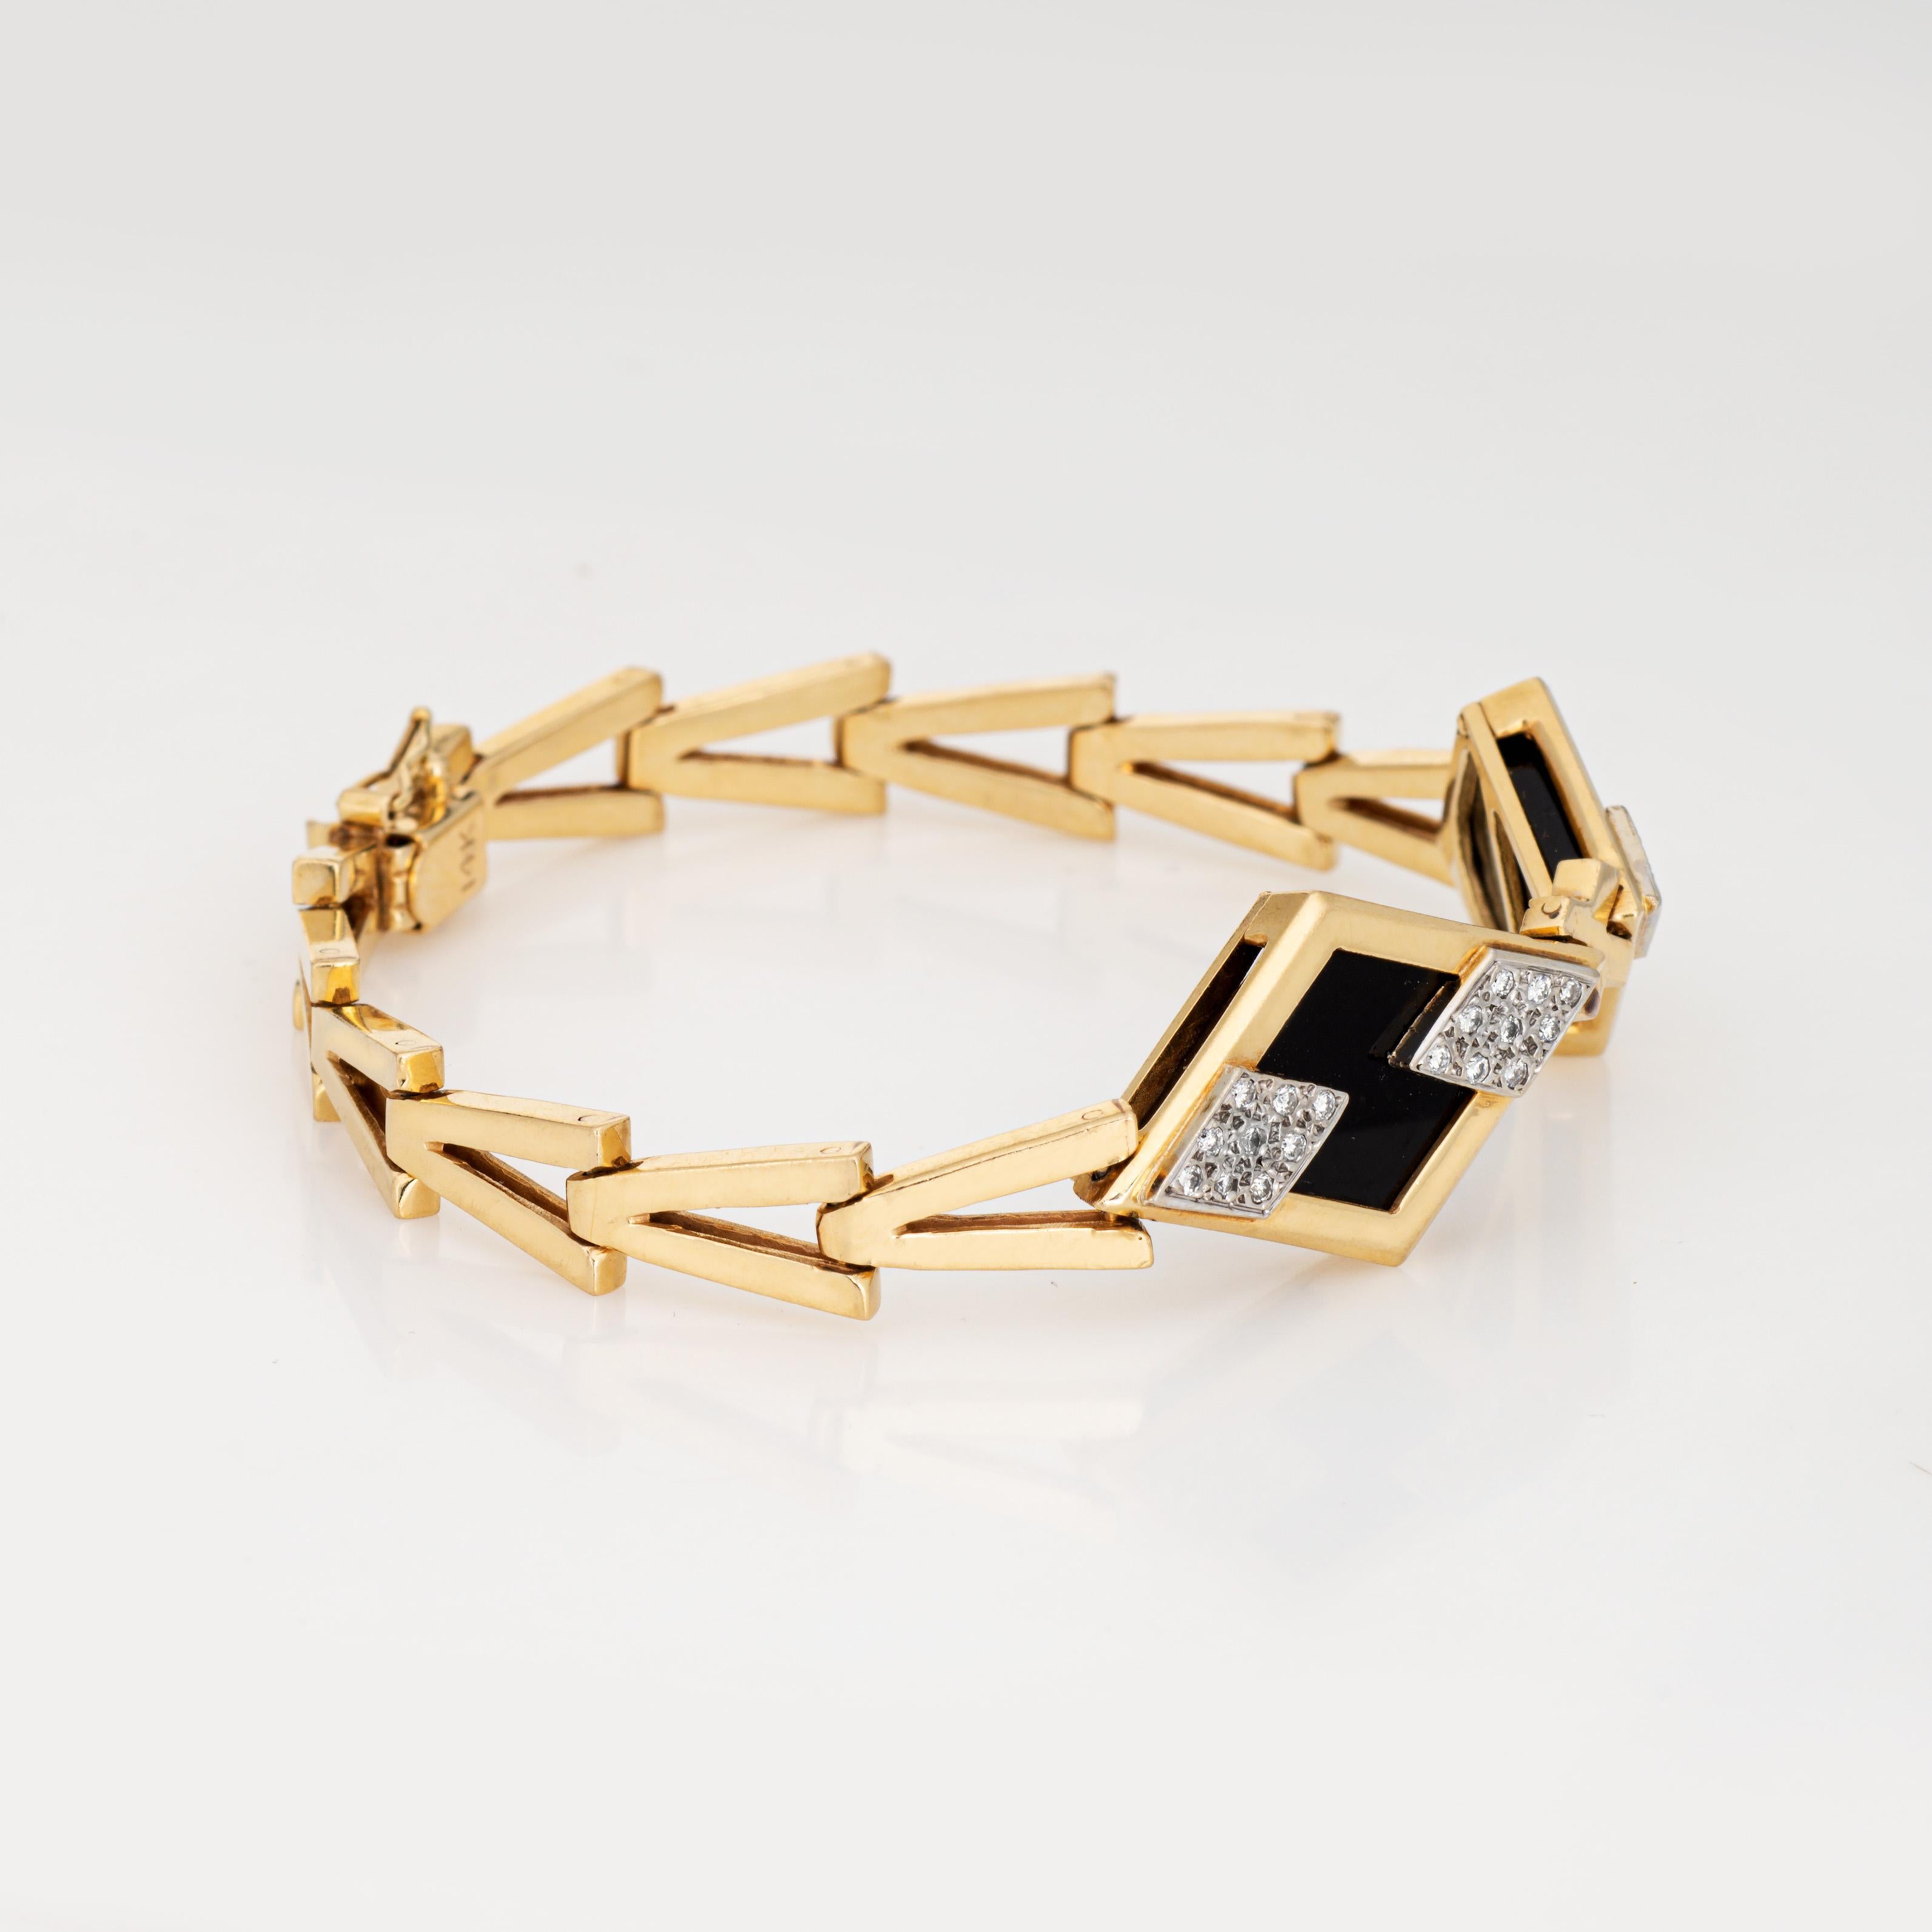 Stylish and finely detailed vintage onyx & diamond bracelet crafted in 14 karat yellow gold (circa 1980s). 

27 diamonds total an estimated .013 carats (estimated at H-I color and SI1-I2 clarity). Onyx measures 10mm x 11mm (in very good condition